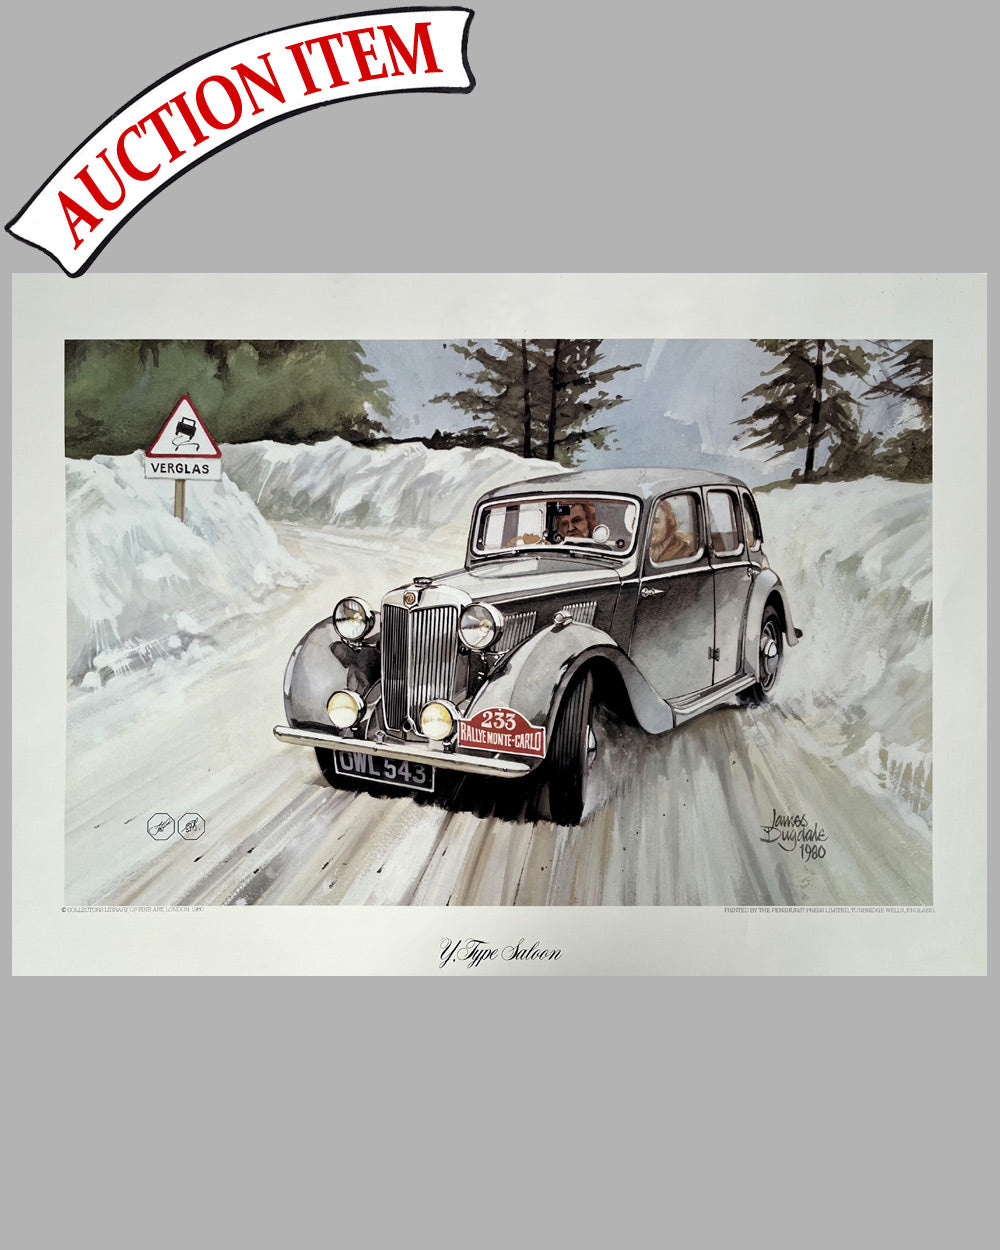 MG Y Type Saloon at the Rally of Monte Carlo color print by James Dugdale